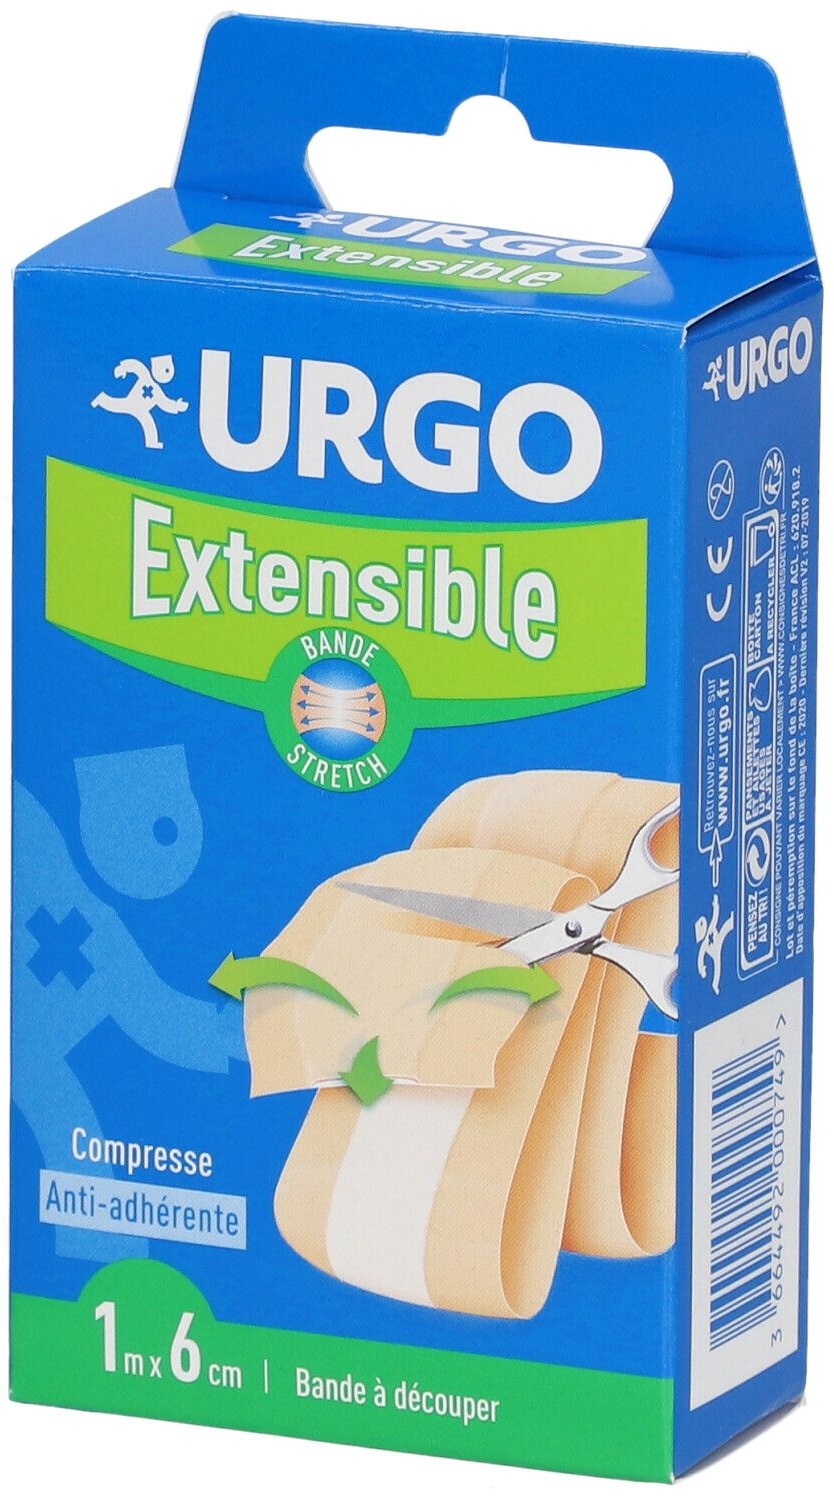 URGO Extensible Bande Protectrice 1 pc(s) pansement(s)